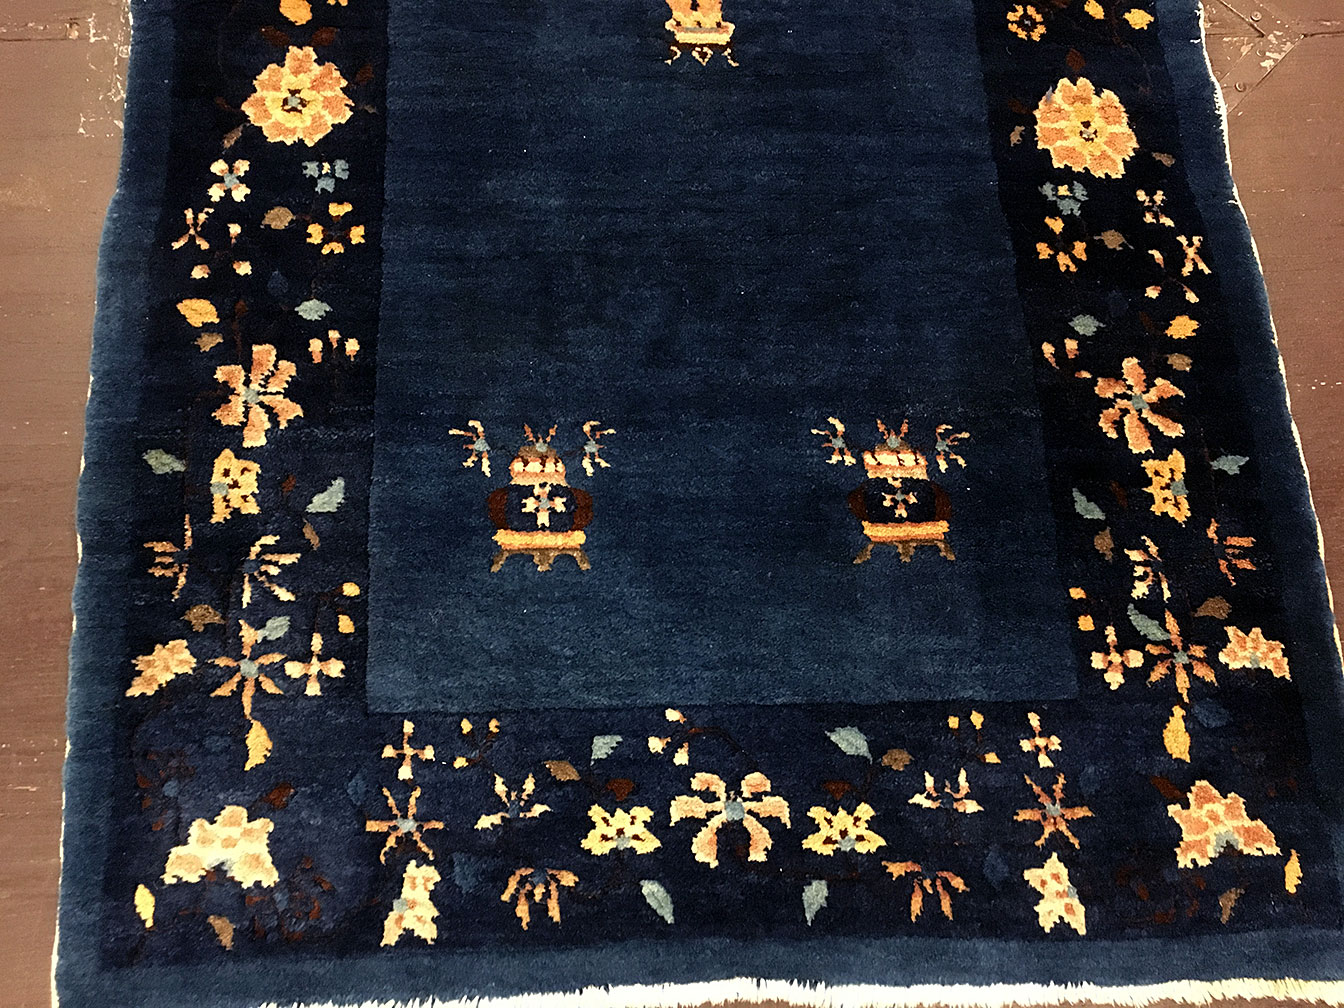 Antique chinese Rug - # 53438